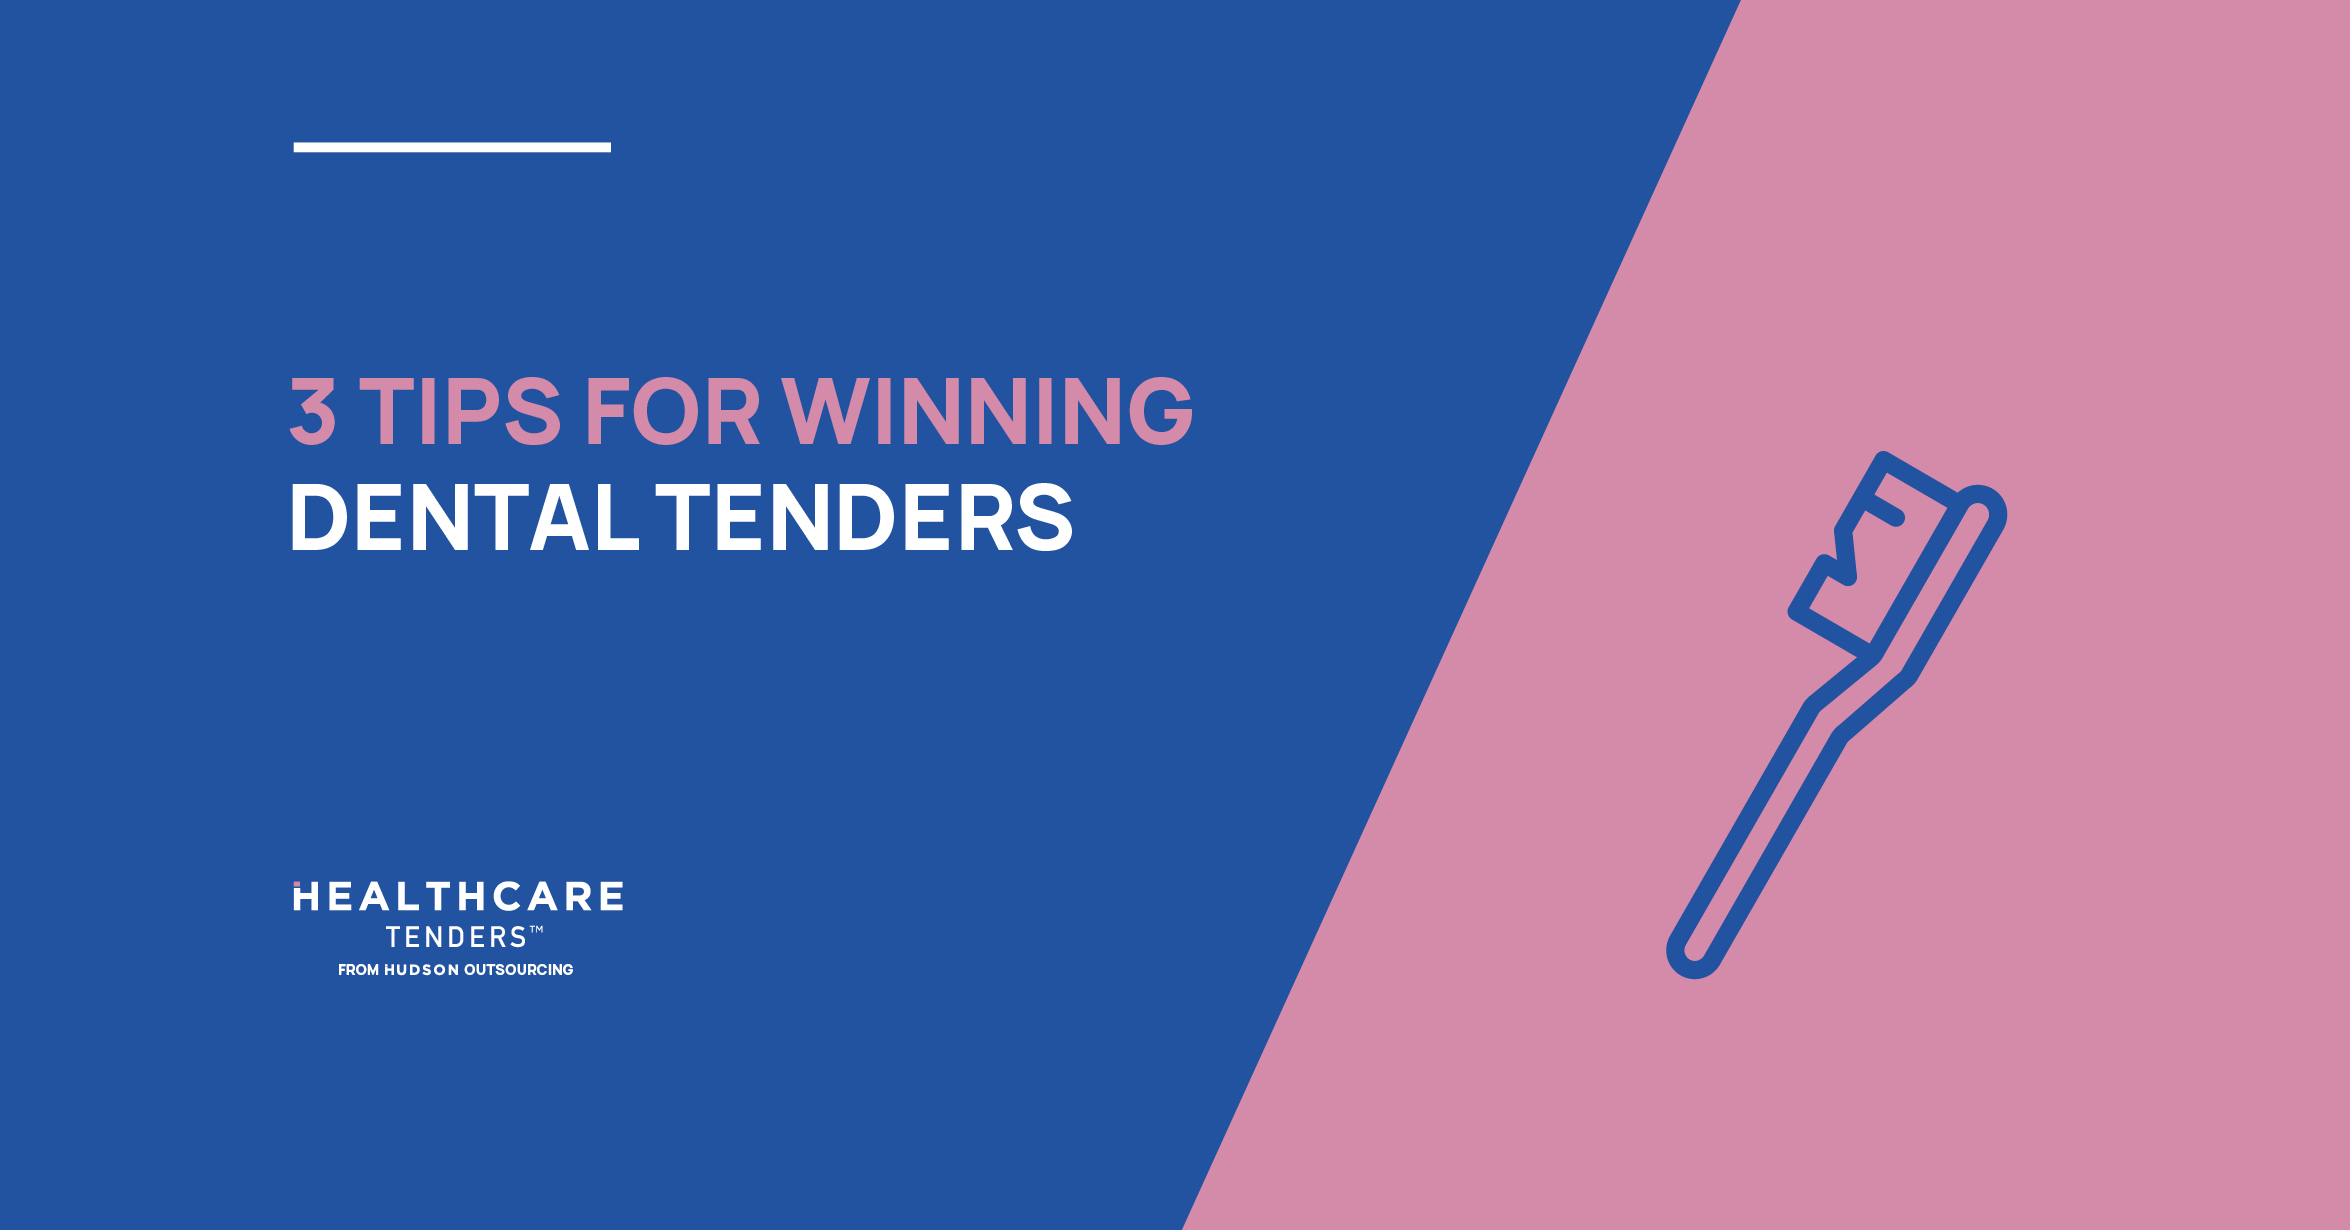 Start Winning Dental Tenders with These 3 Tips